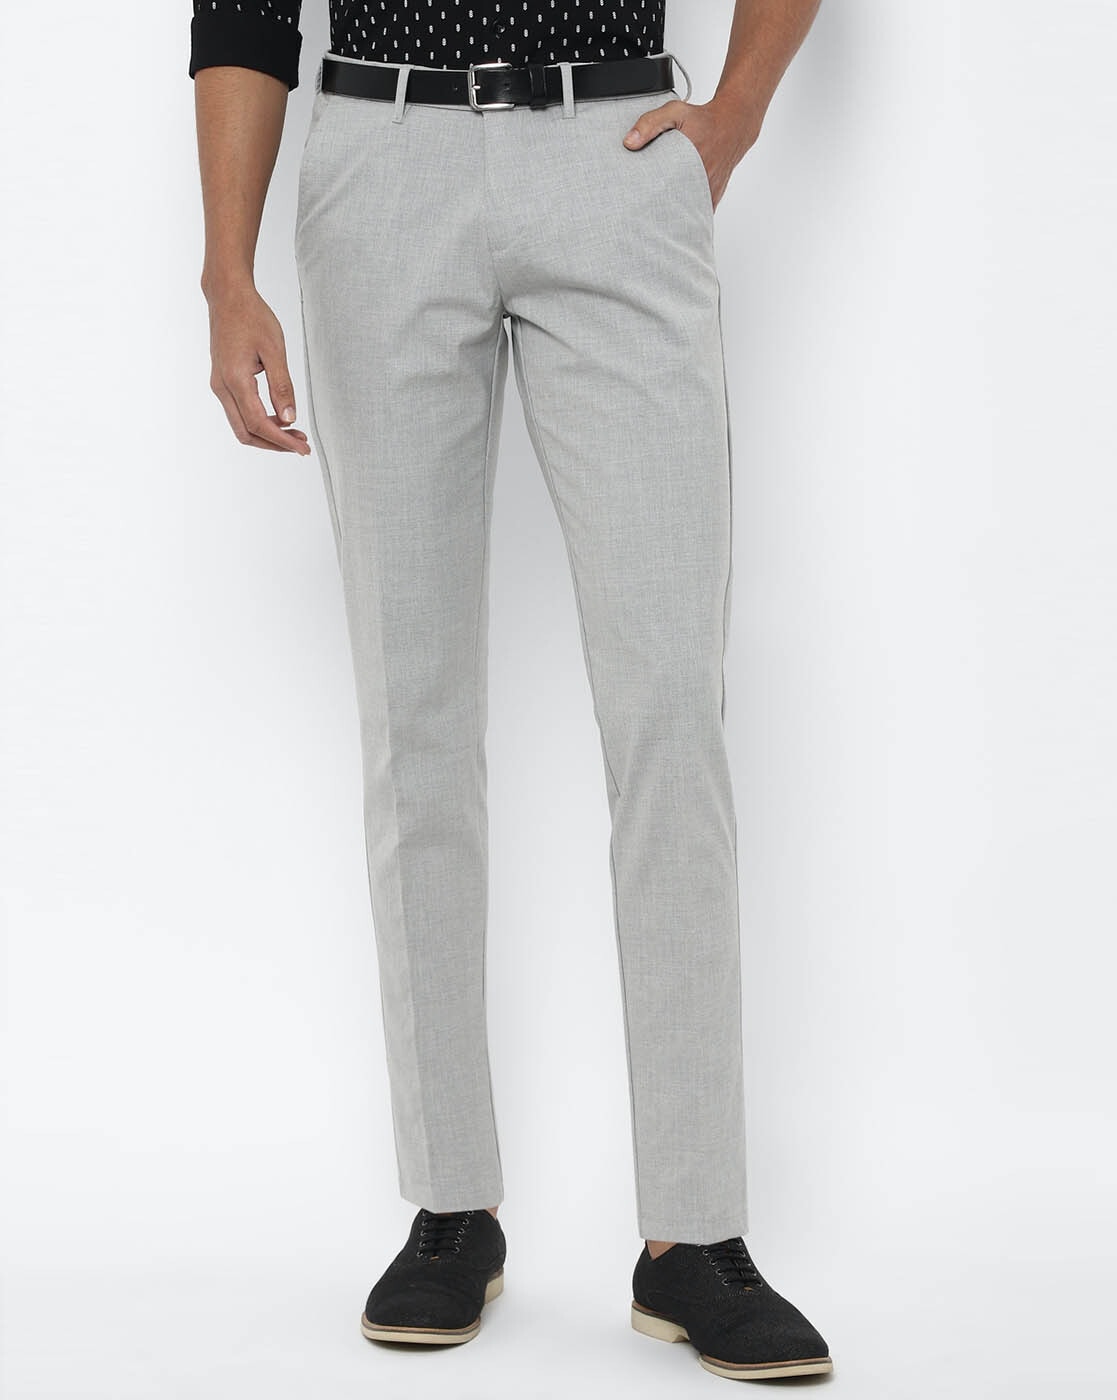 Buy Grey Trousers & Pants for Men by Haul Chic Online | Ajio.com